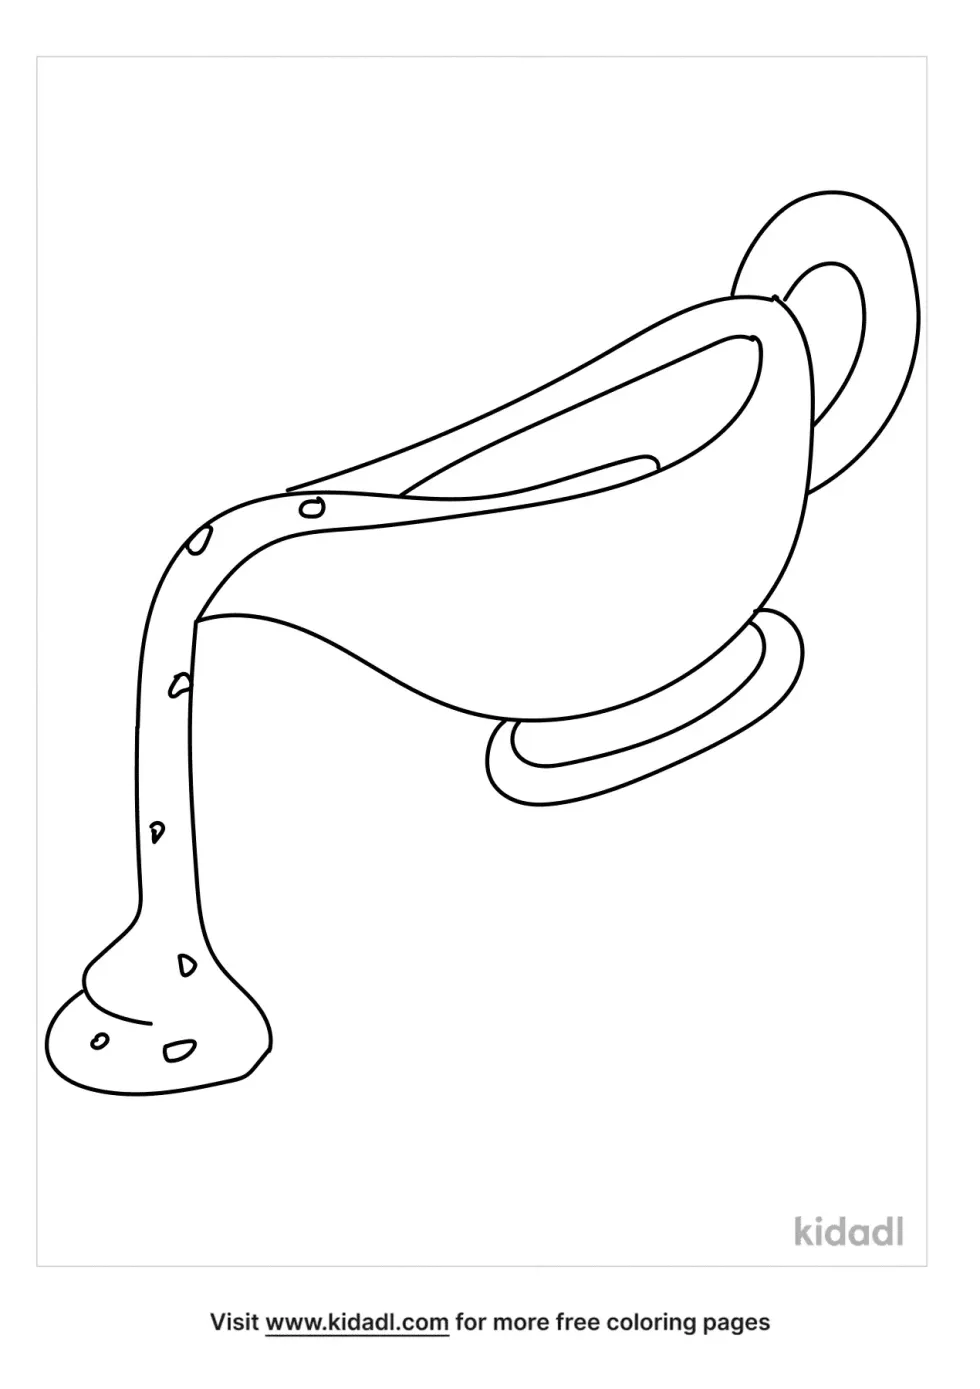 Gravy Coloring Page